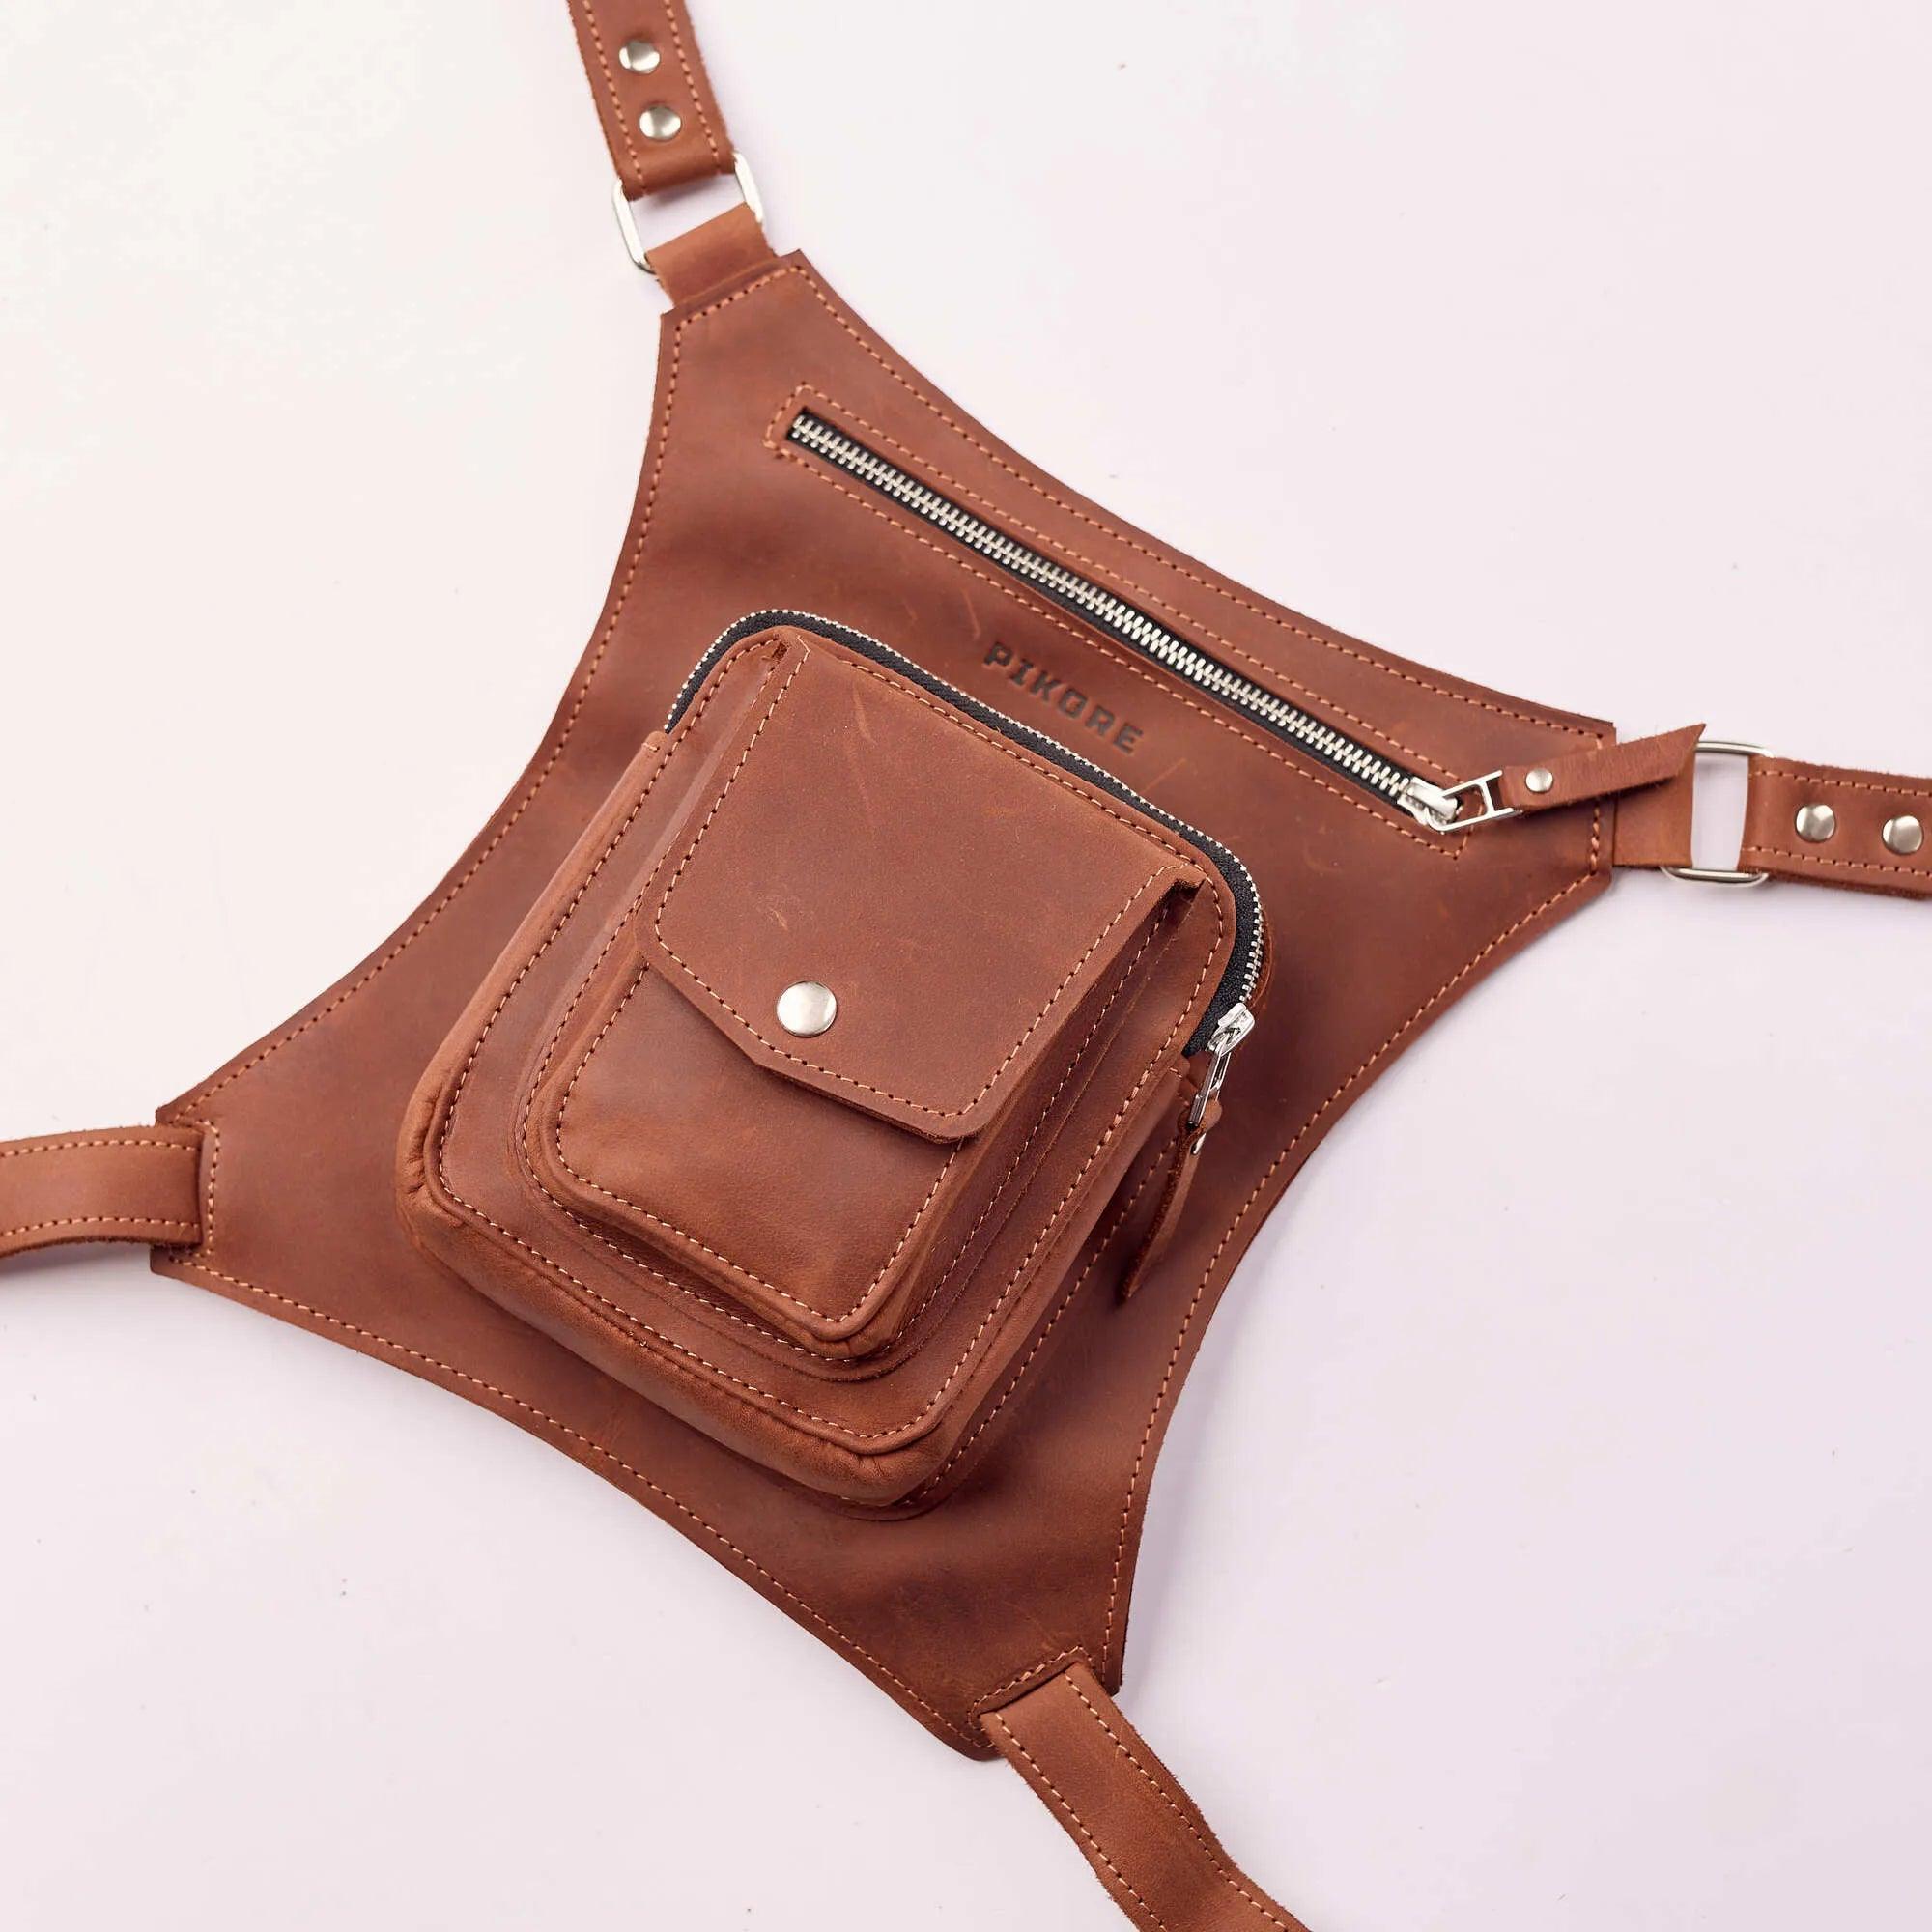 Leather Hip Pack with Thigh Strap - Pikore